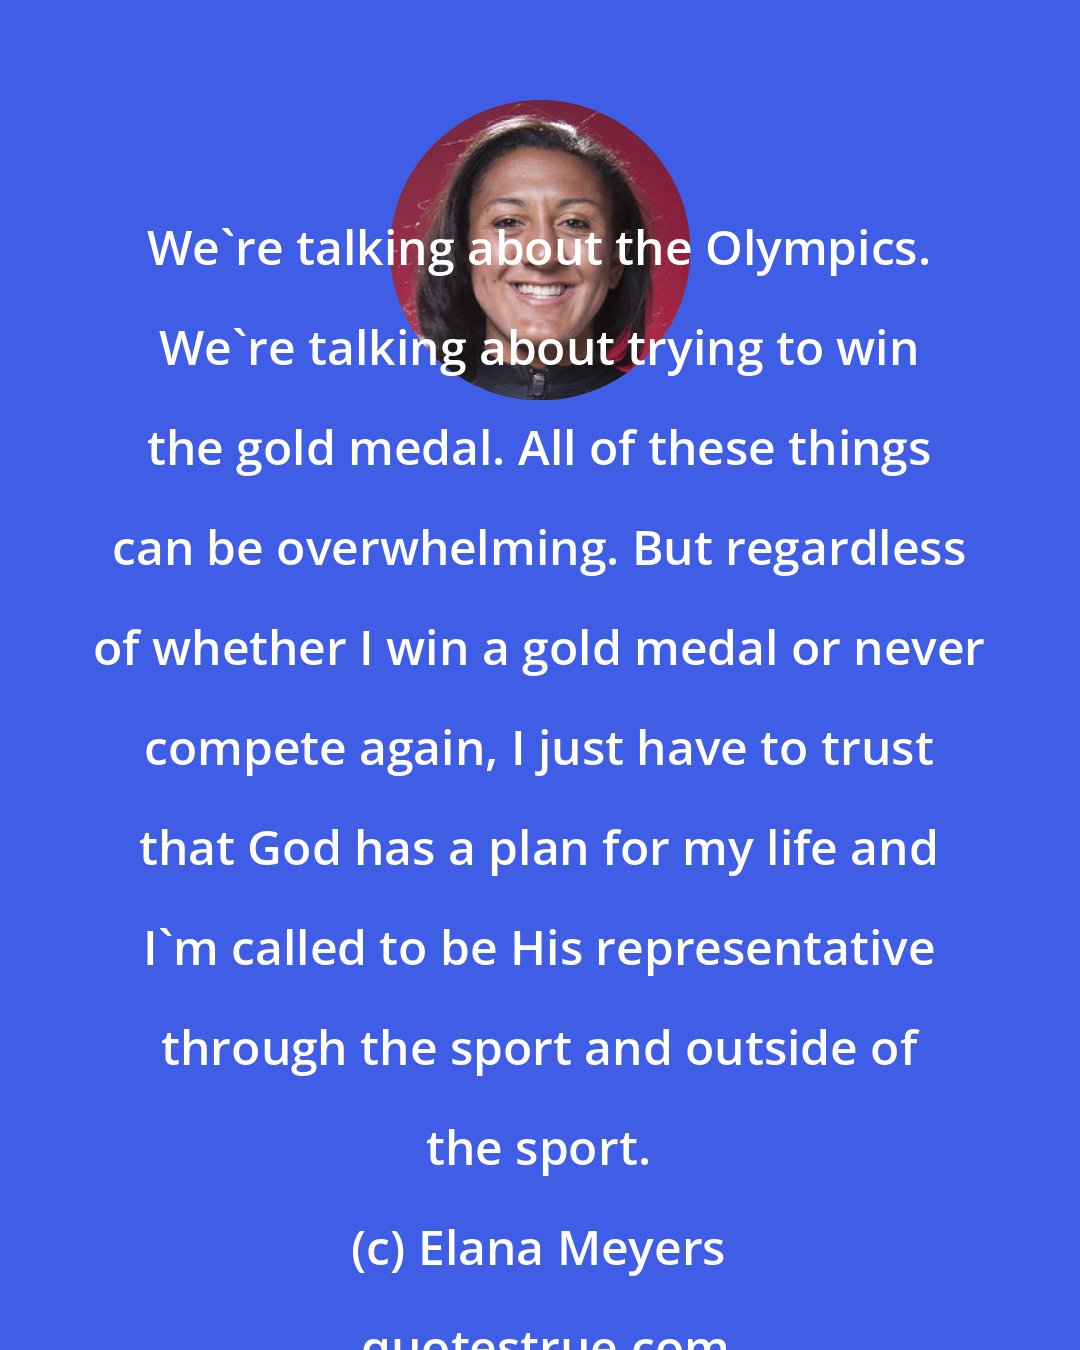 Elana Meyers: We're talking about the Olympics. We're talking about trying to win the gold medal. All of these things can be overwhelming. But regardless of whether I win a gold medal or never compete again, I just have to trust that God has a plan for my life and I'm called to be His representative through the sport and outside of the sport.